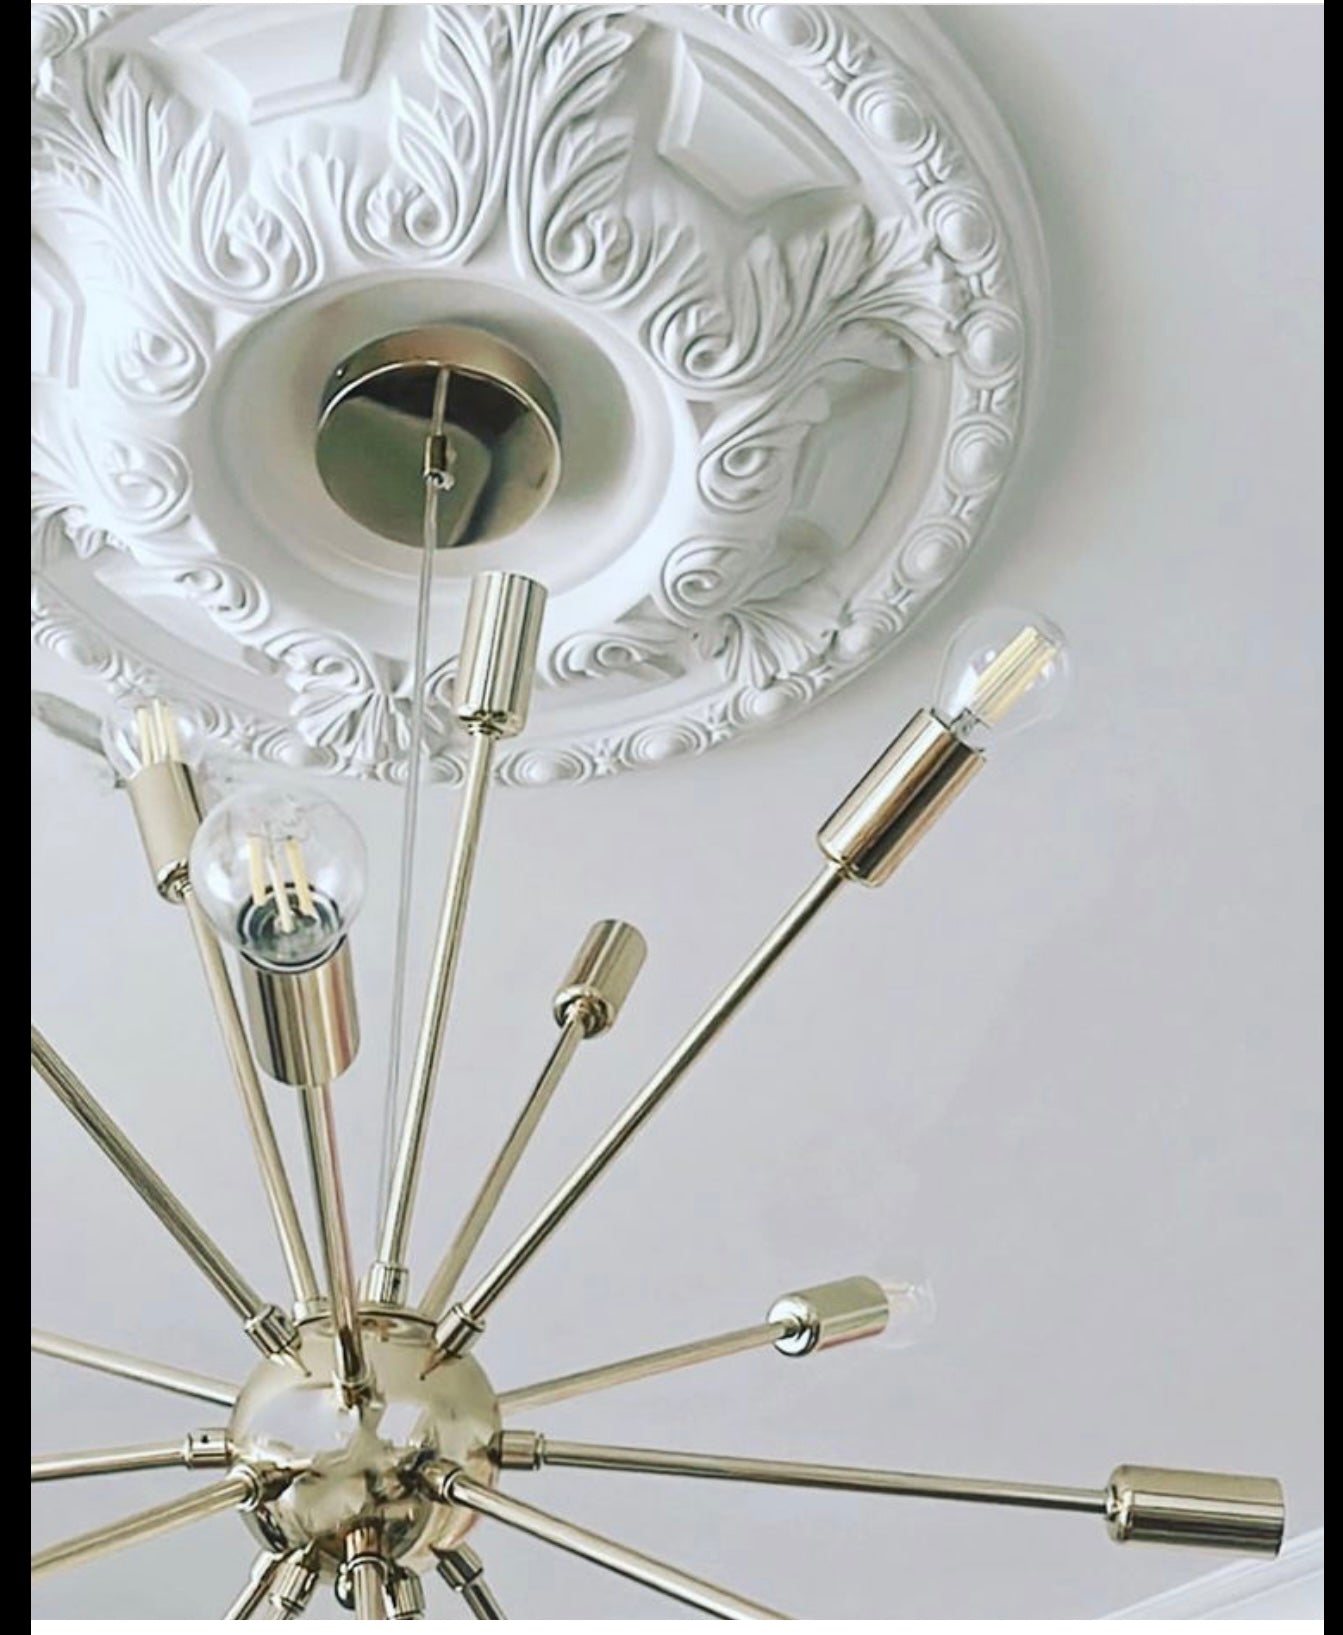 B3033 - Ceiling Rose installed in a ceiling with a light